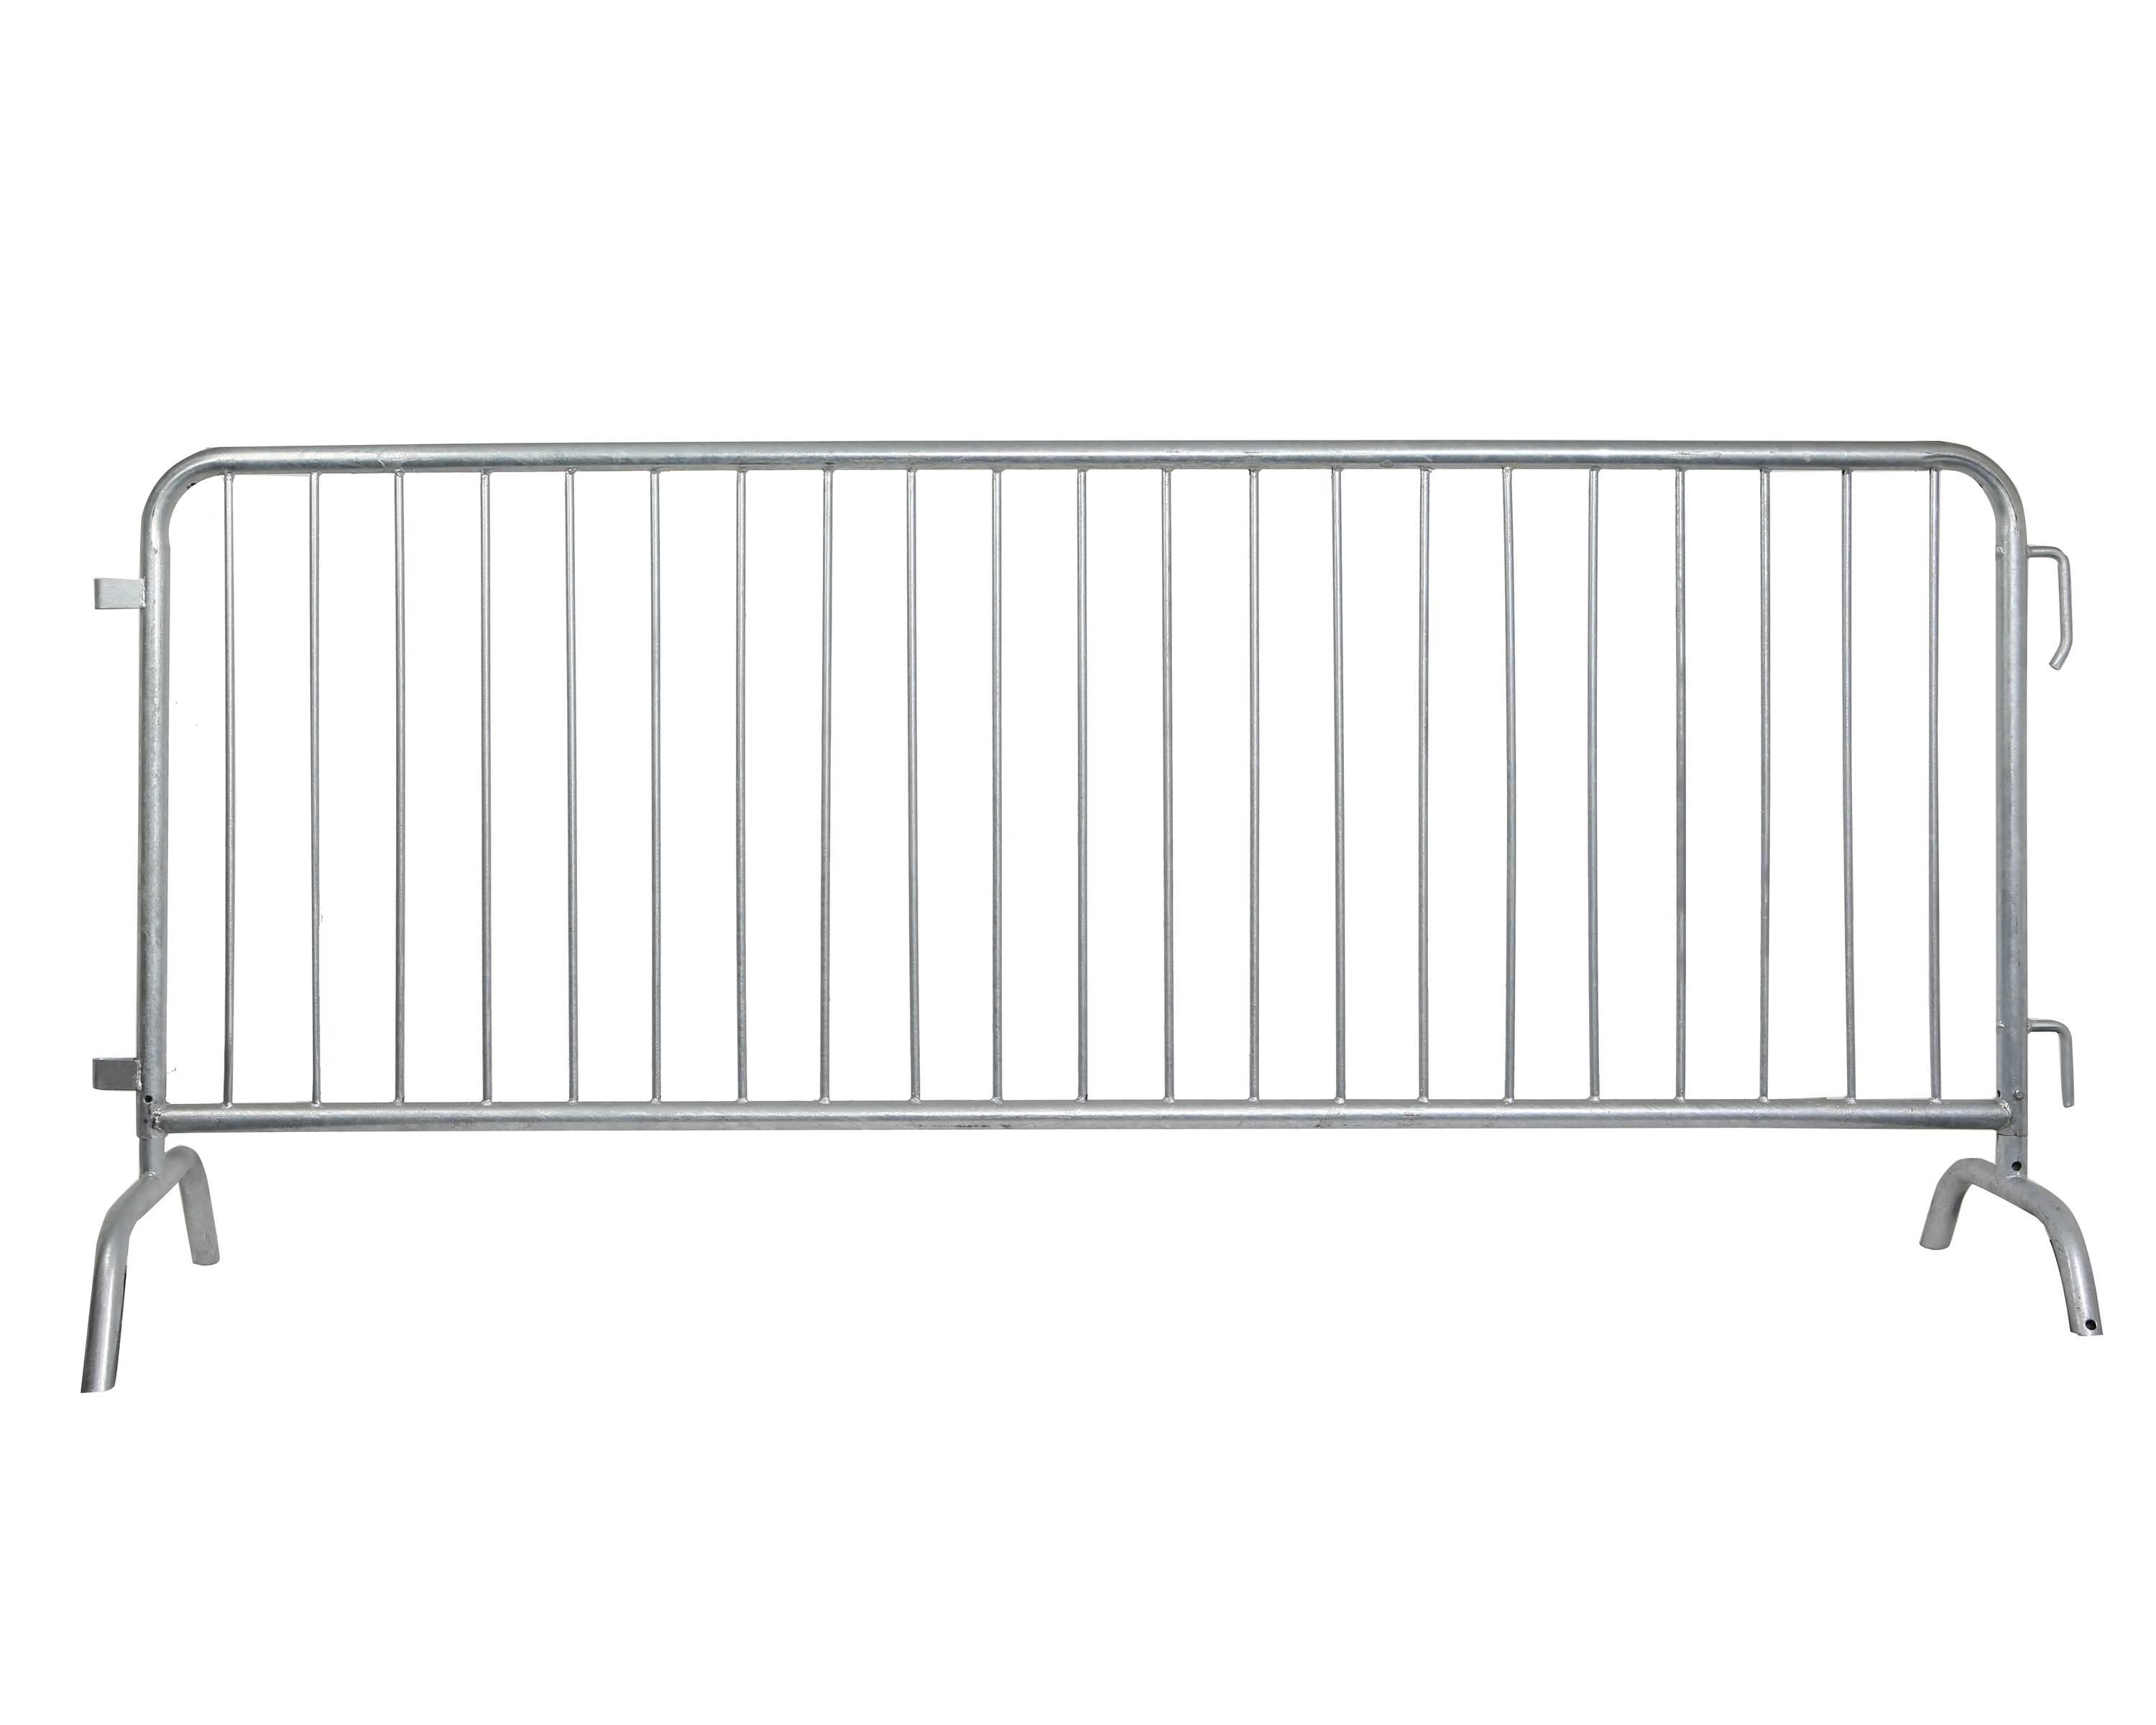 Popular Design for Crowd Control Barriers For Event -
 PVC Crowd Control Barrier Temporary Fence  – Xinhai